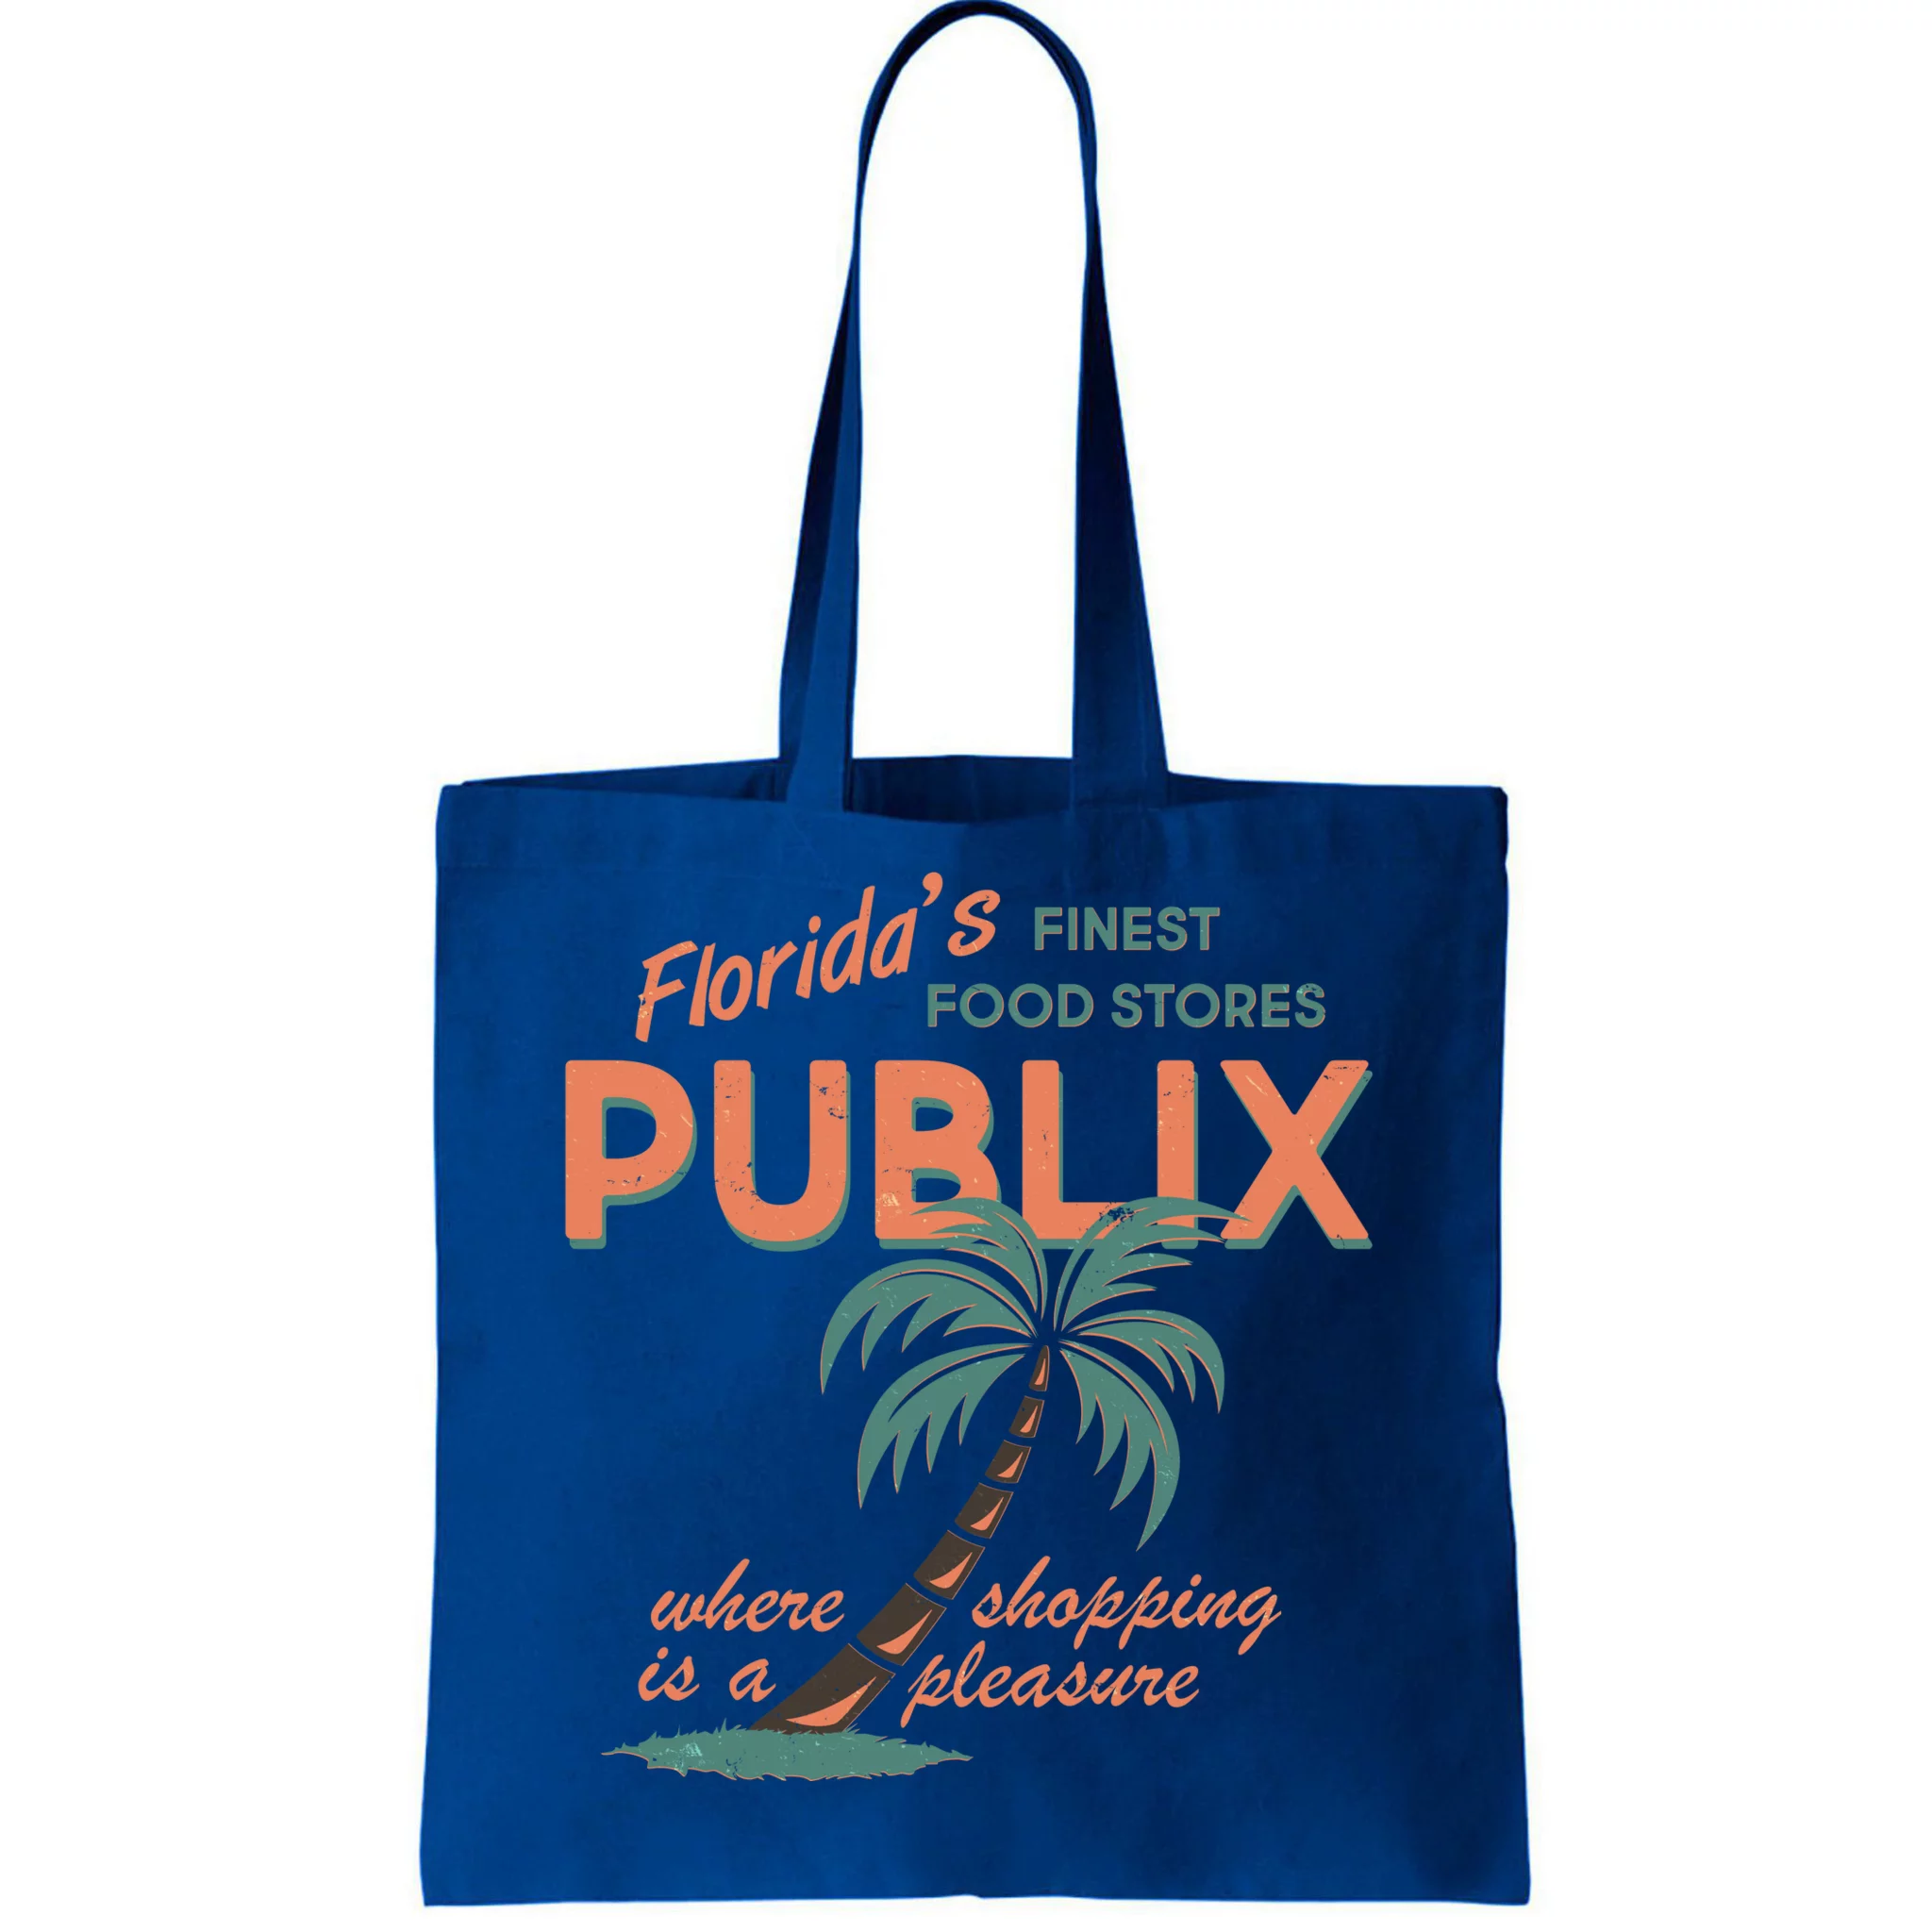 Publix - Carry your favorite products home in a reusable refrigerated bag.  | Facebook